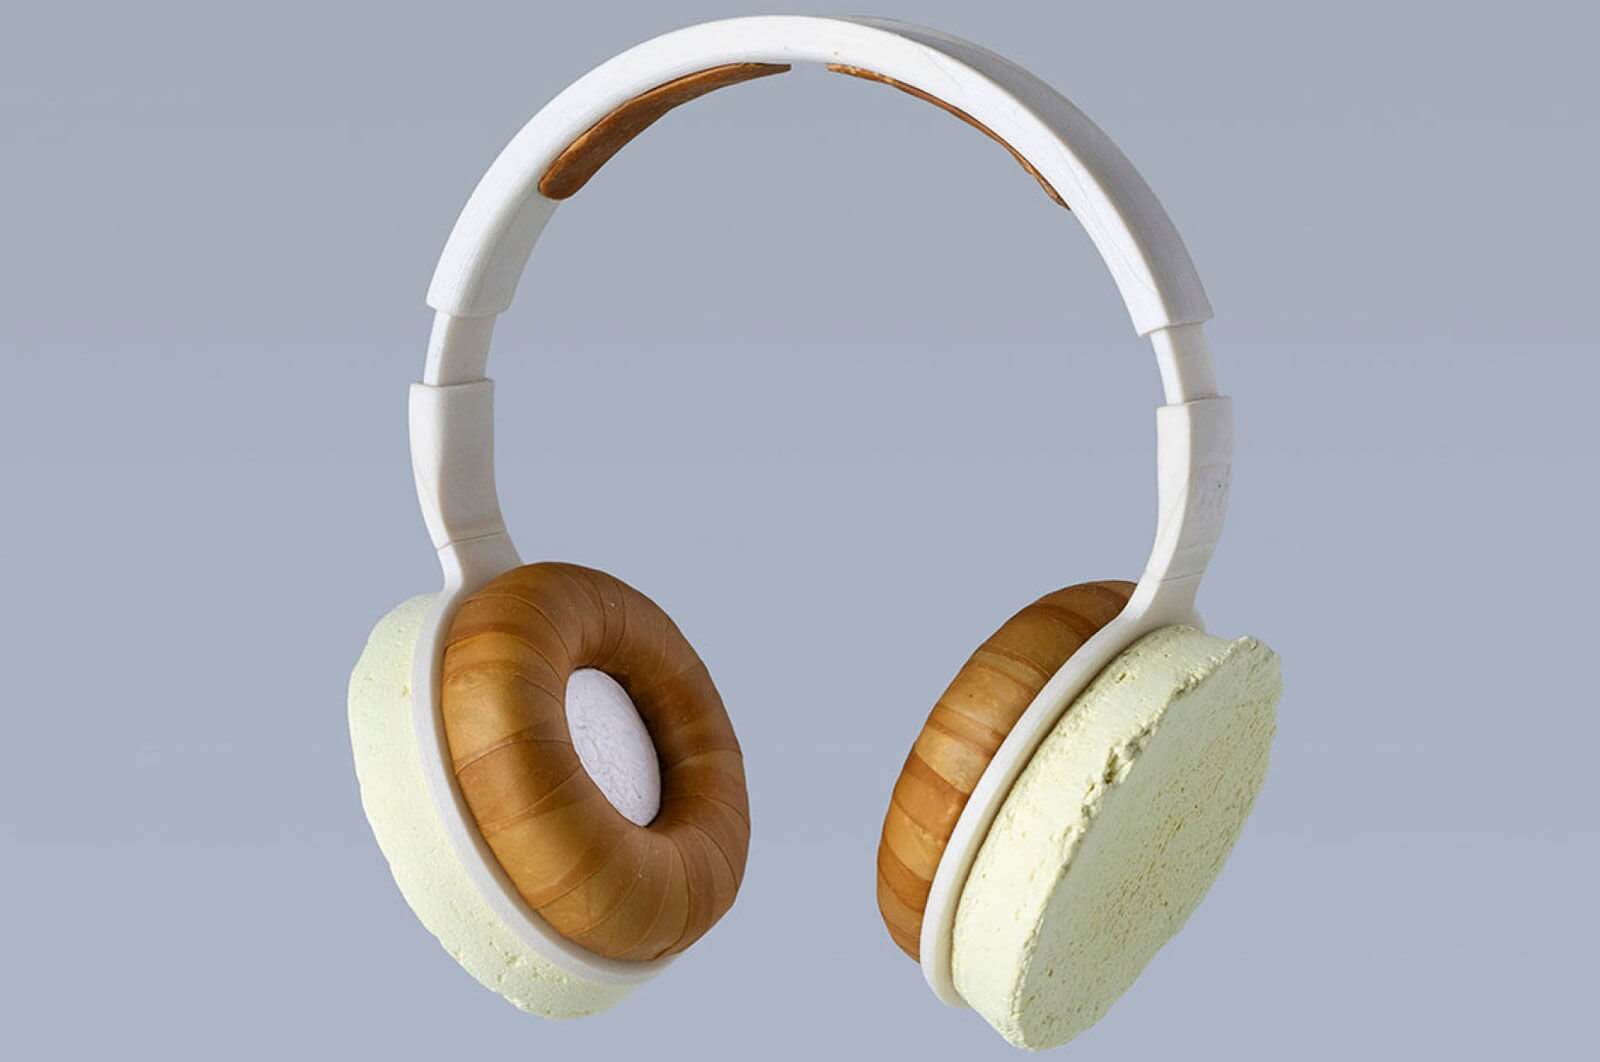 Could these fungus headphones help alleviate the e-waste problem?